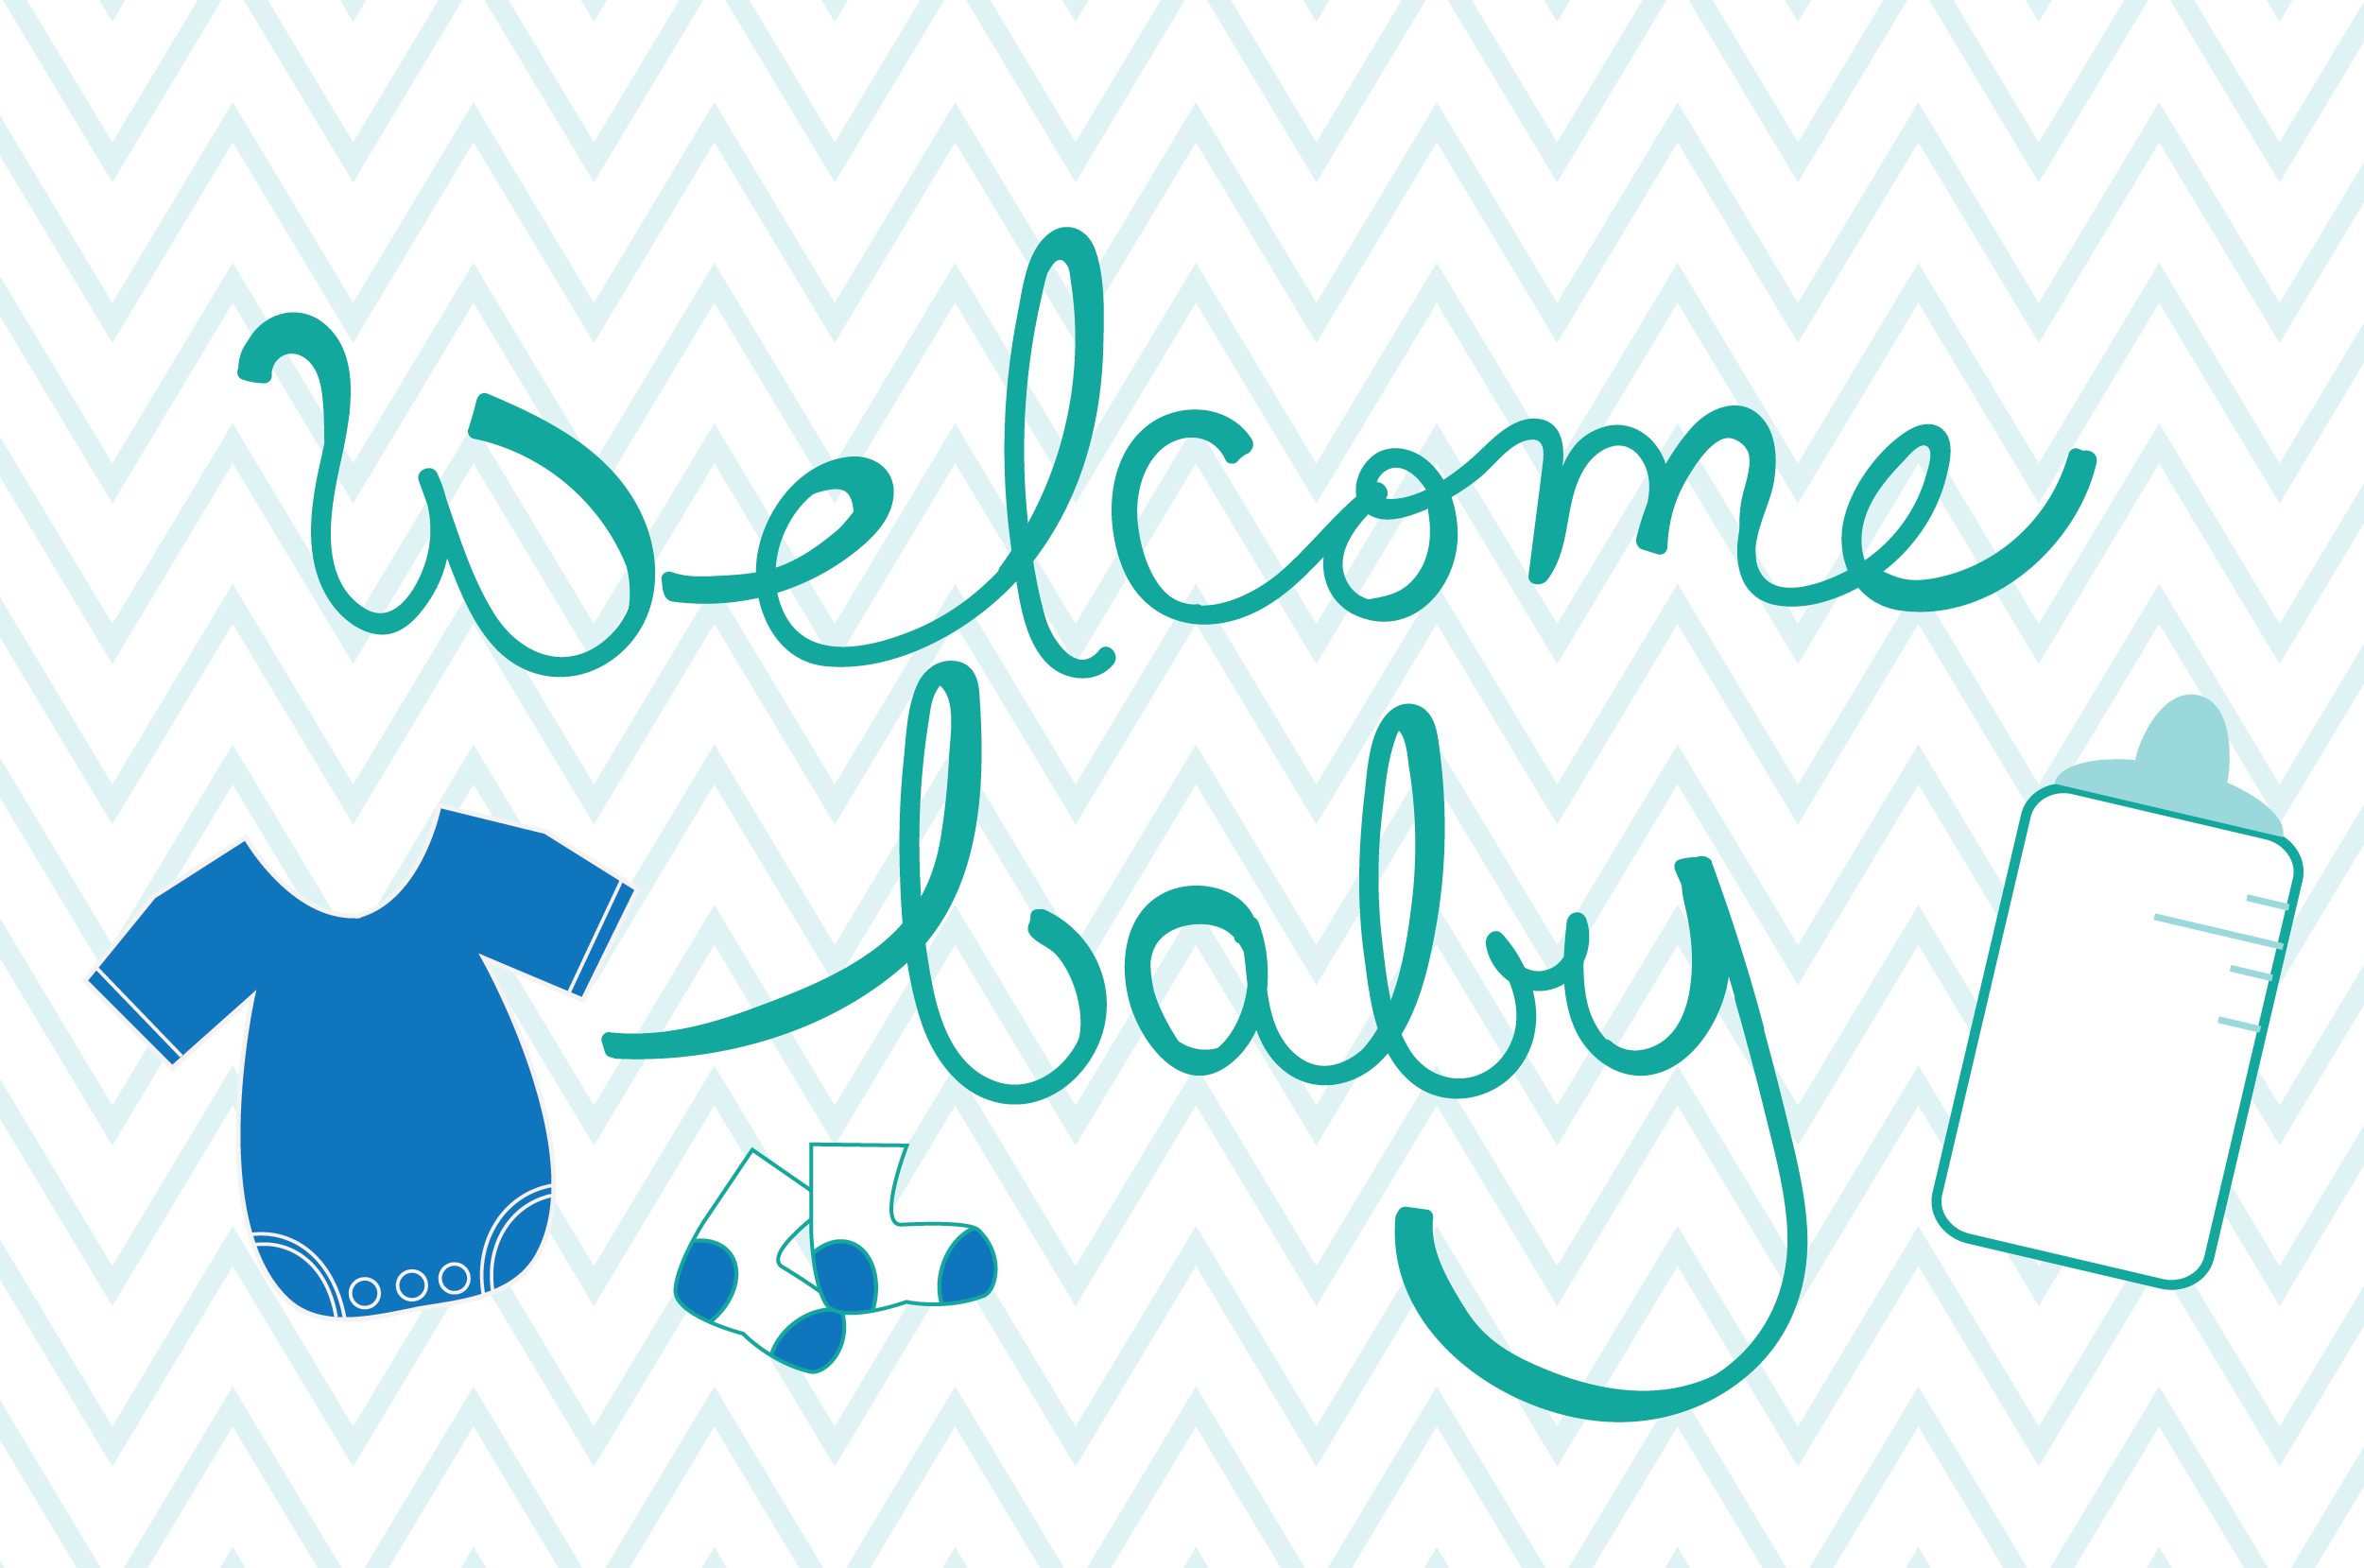 welcome baby boy card